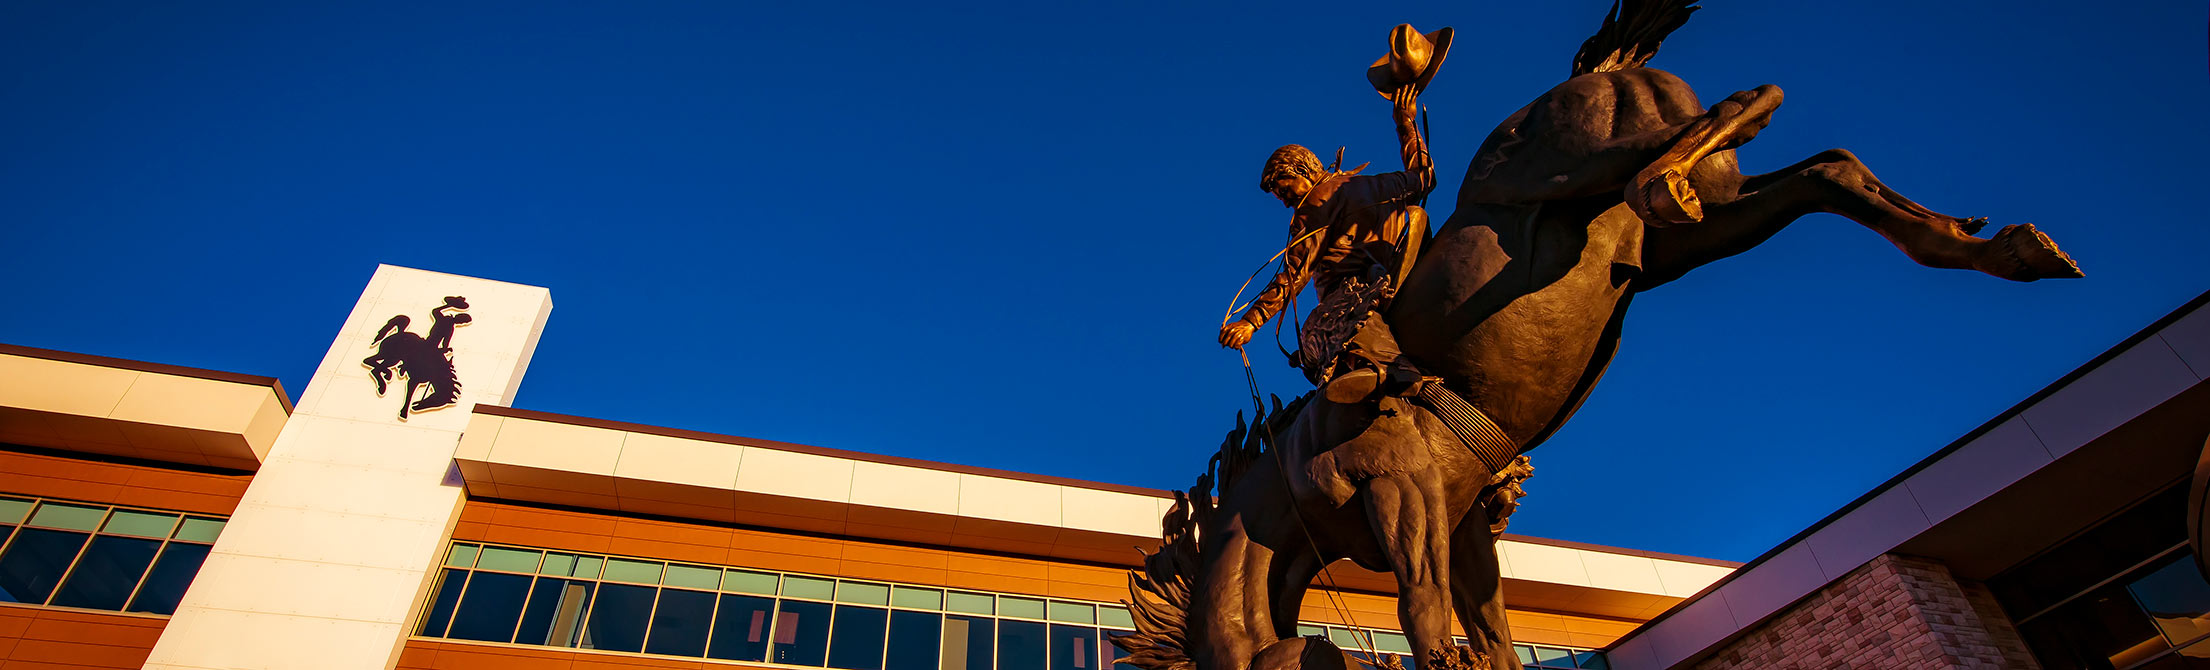 Bronze statue of cowboy on a bucking horse, in front of the Gateway building